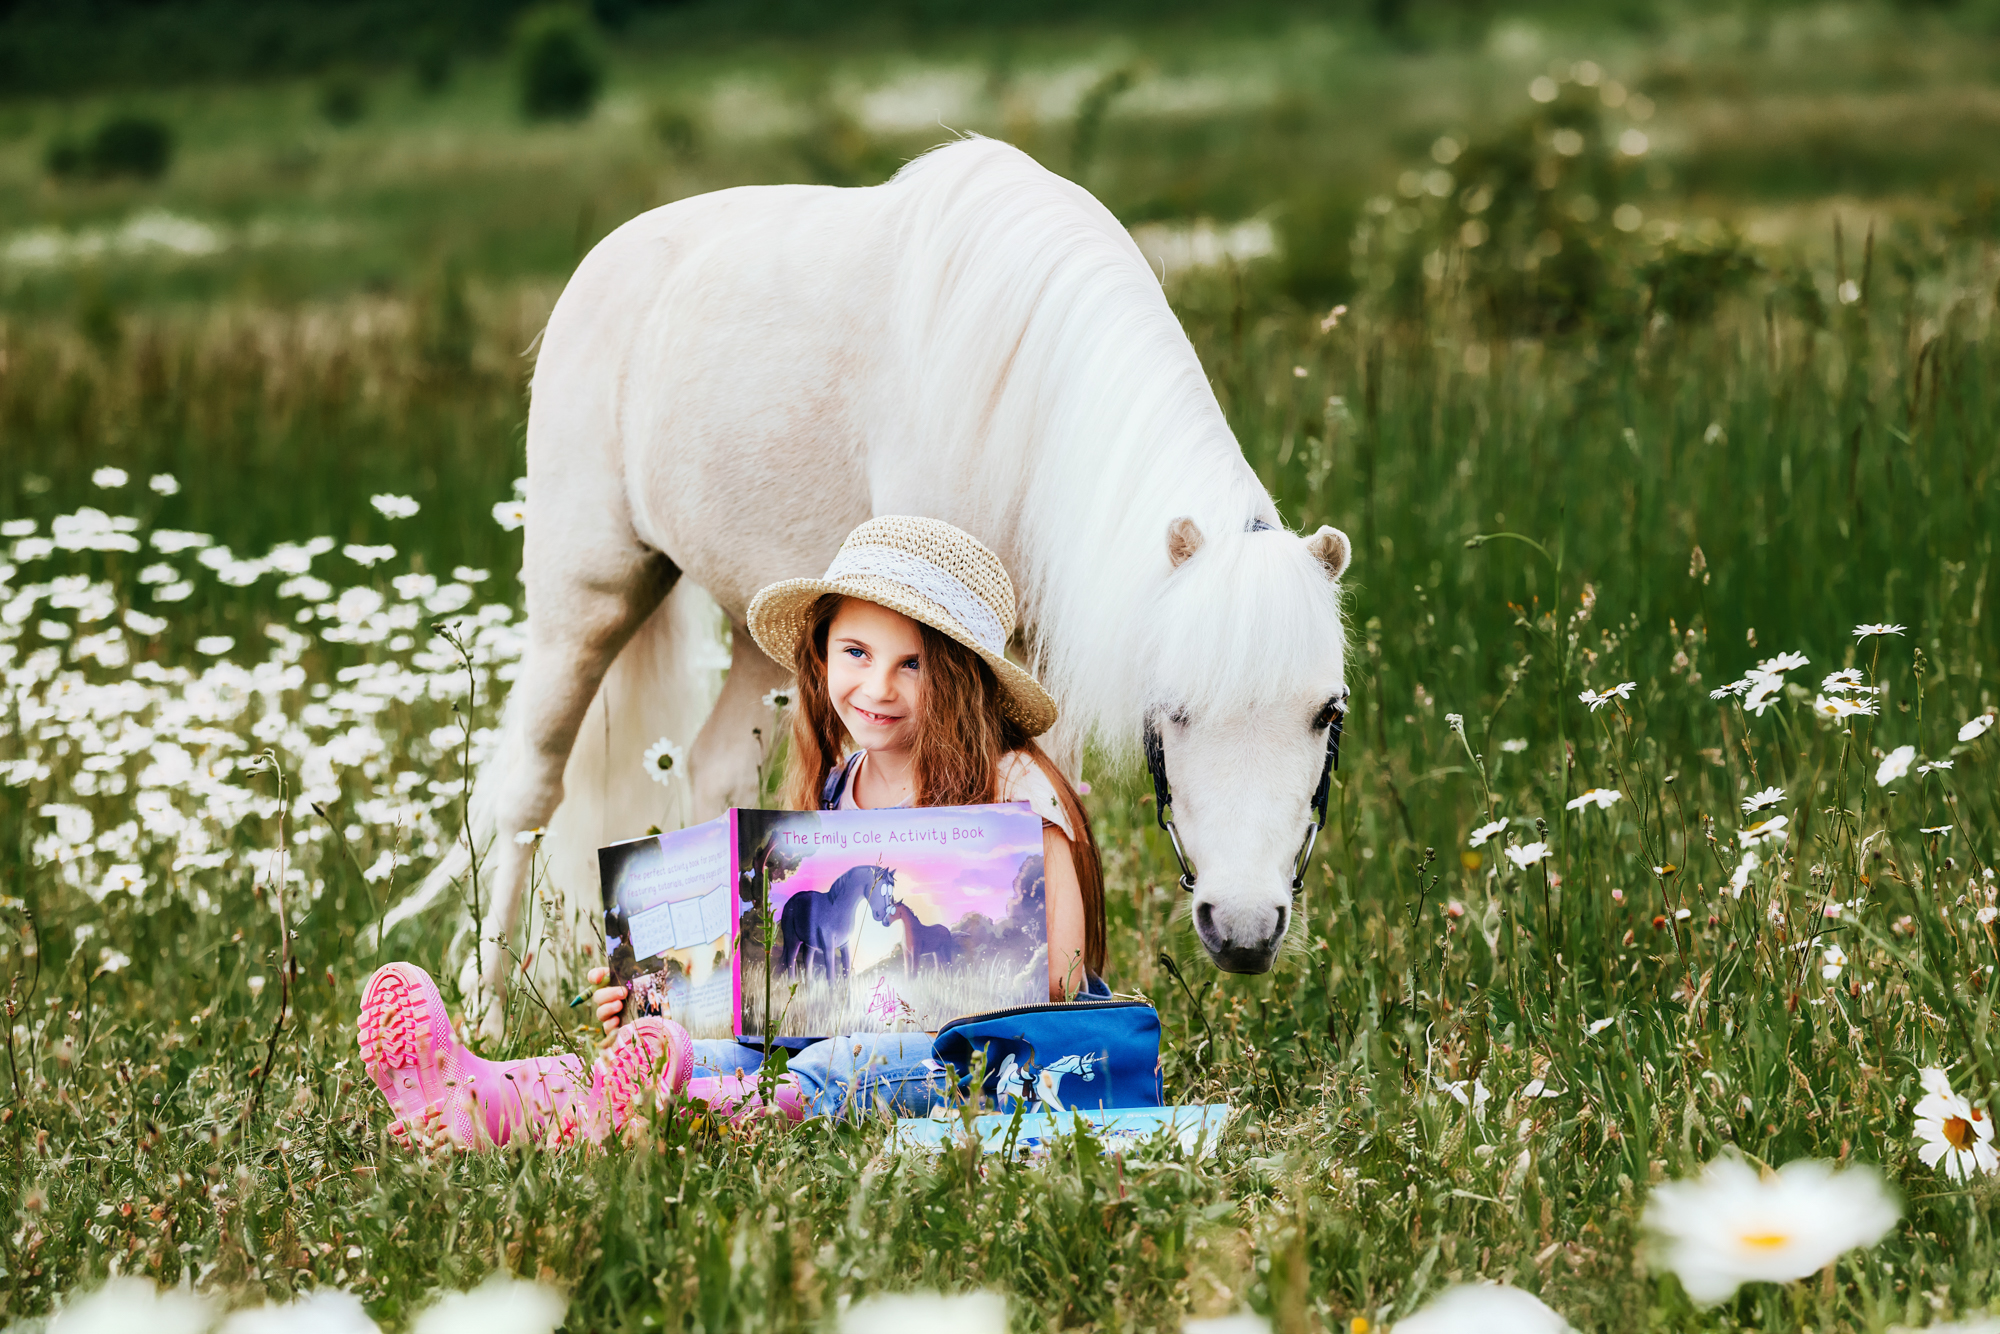 little girl smiling holding the emily cole activity book for children open. A small pony is stood behind her